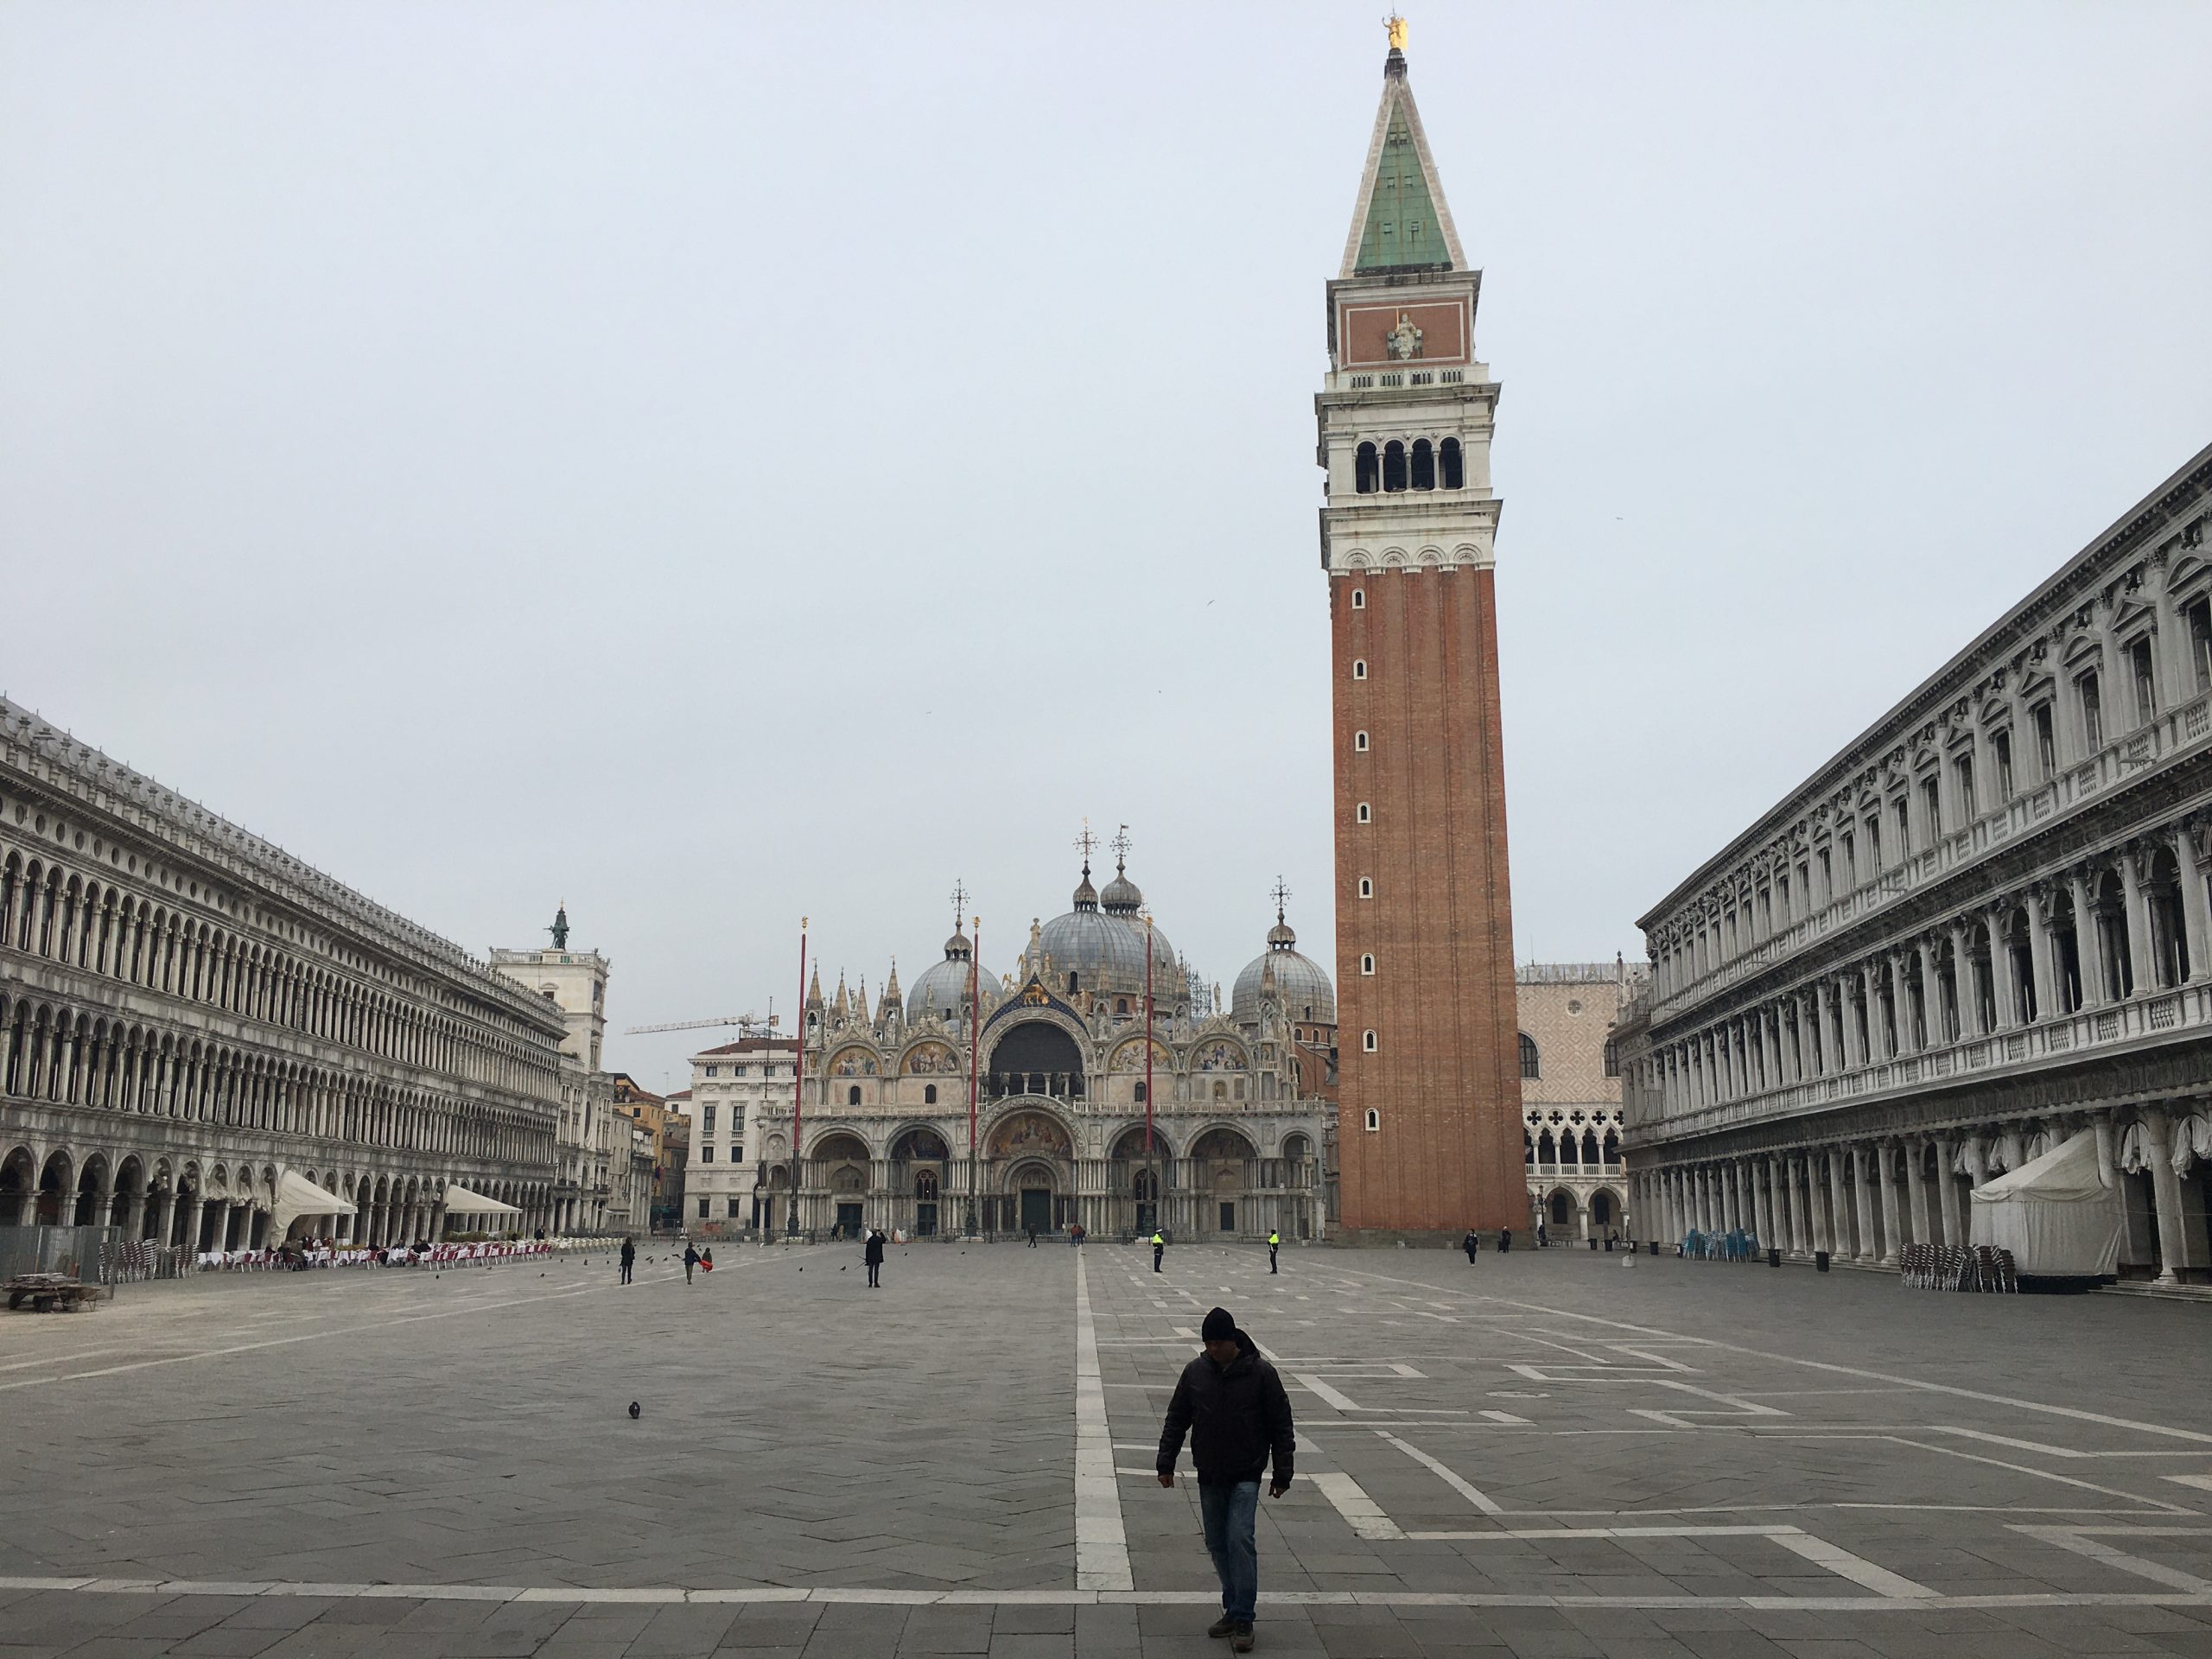 CNN 18.05.2020: Deserted Venice Contemplates A Future Without Tourist Hordes After Covid-19